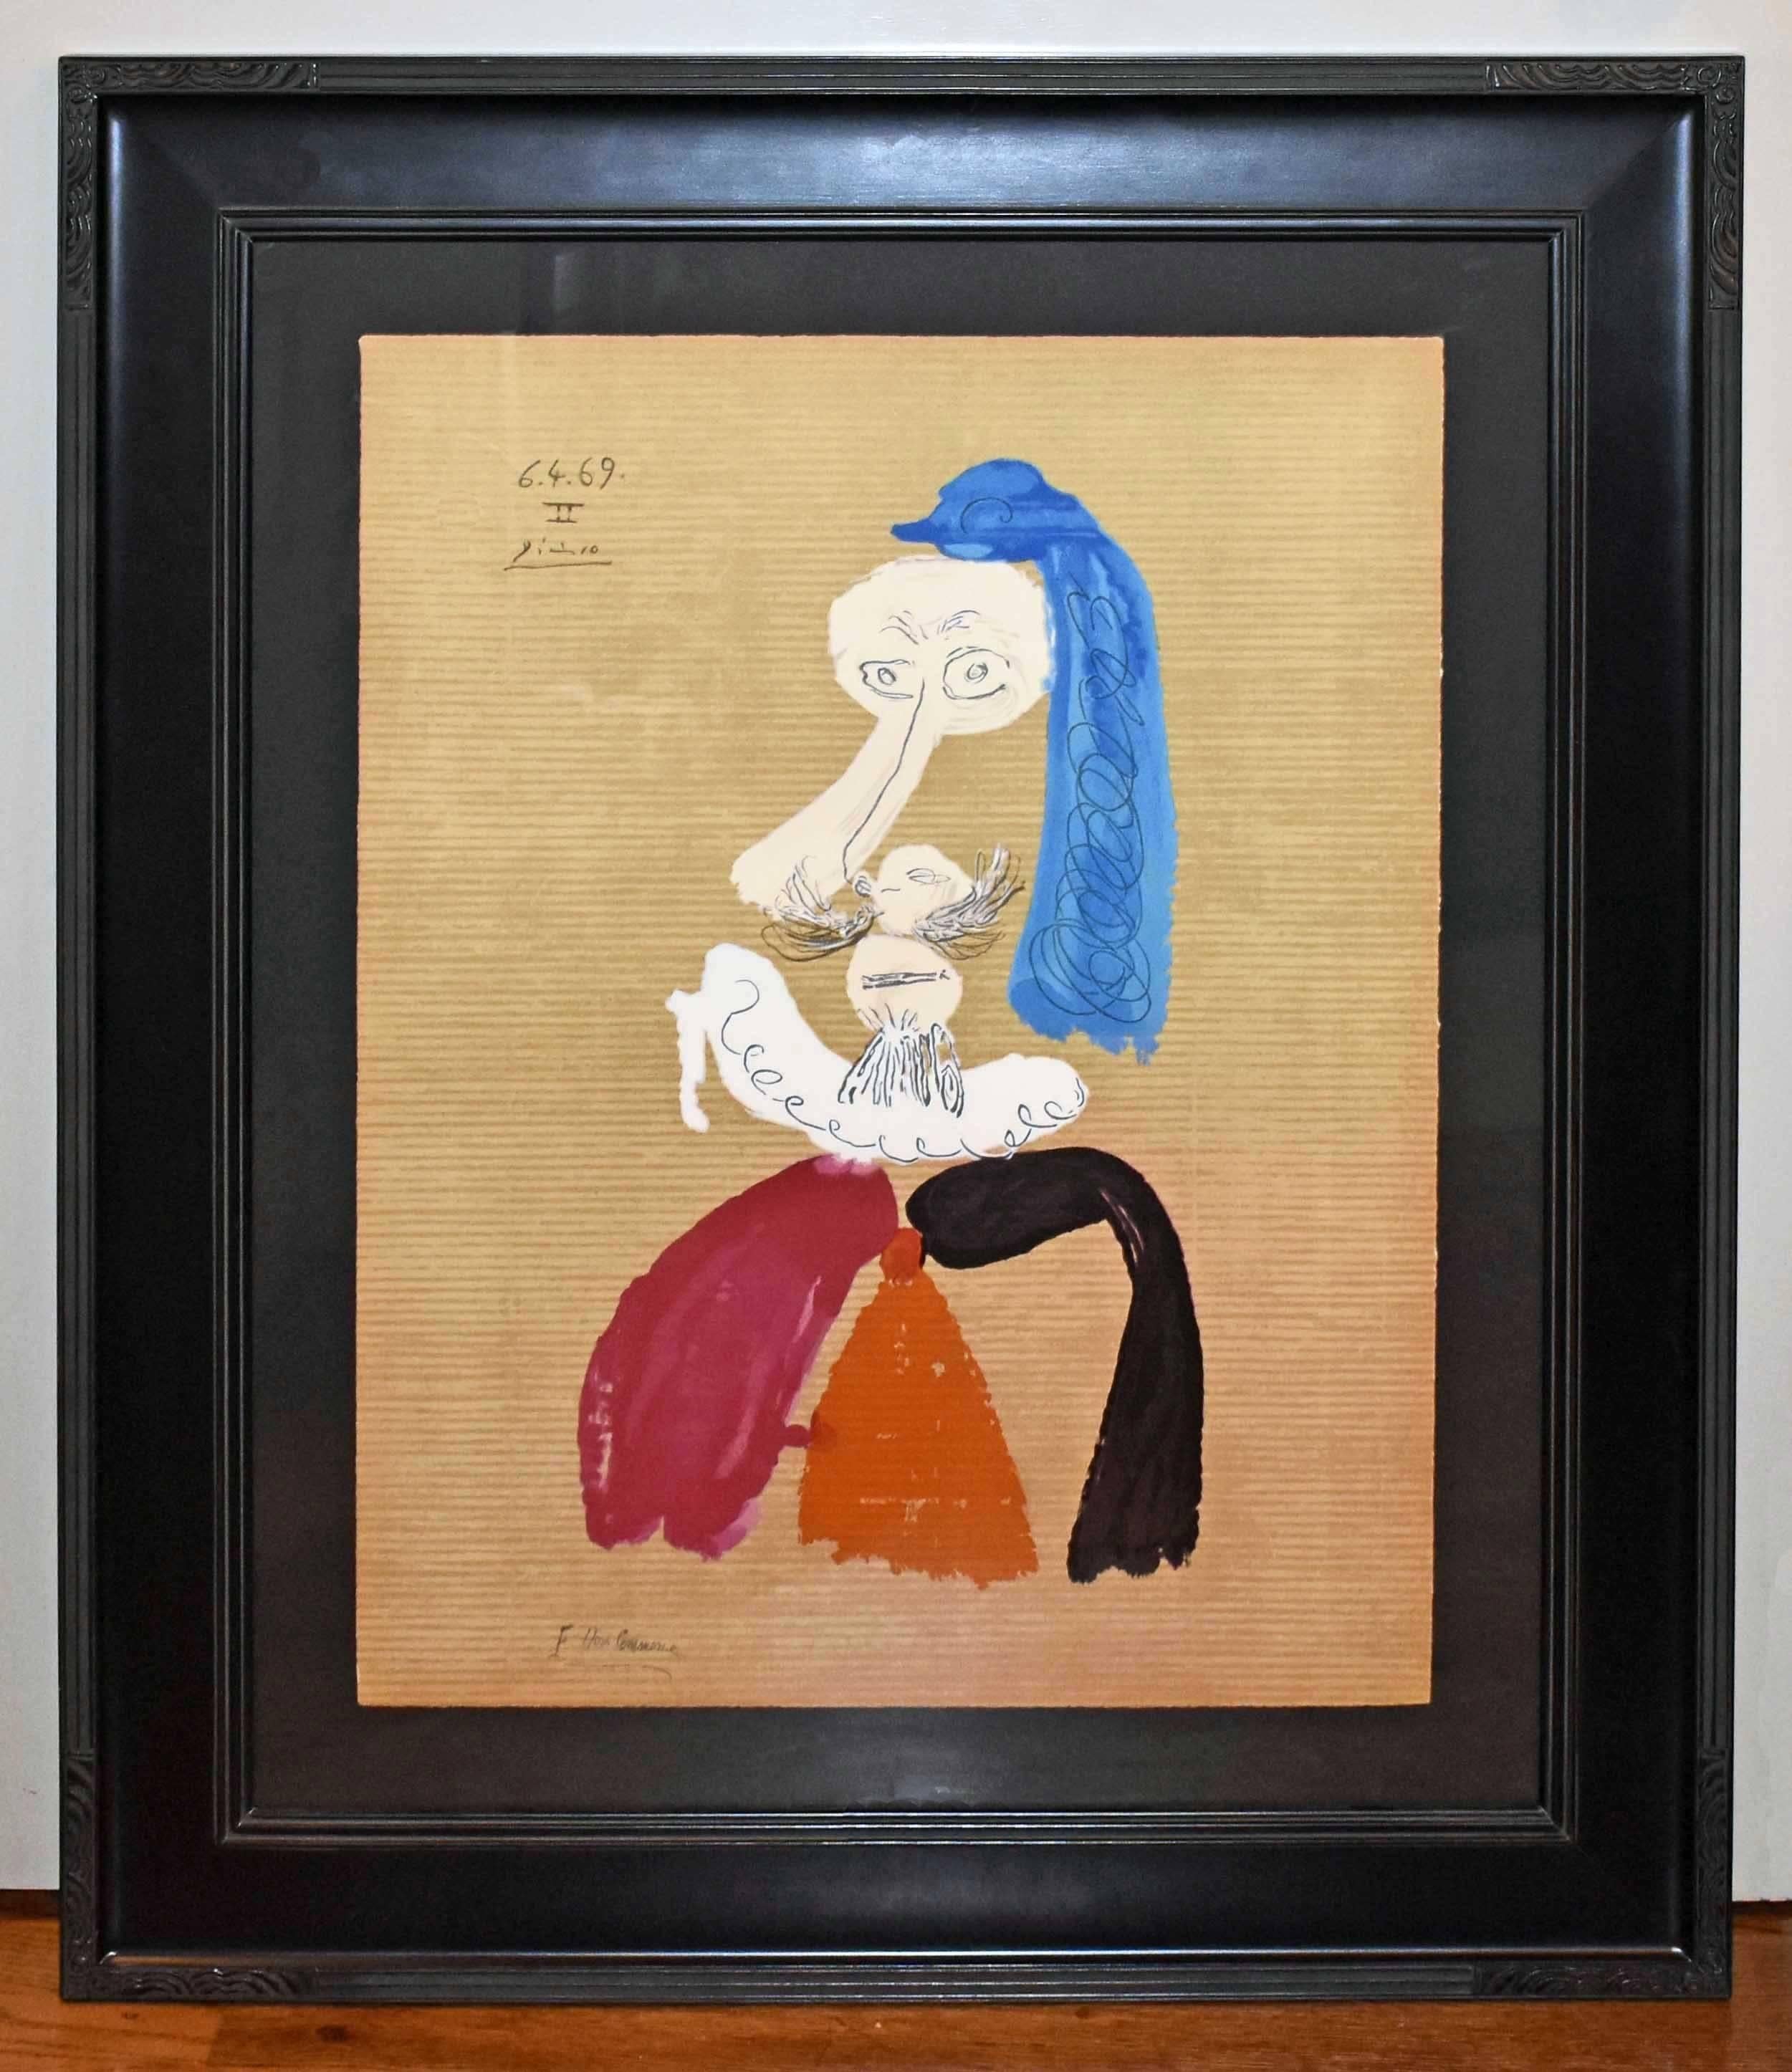 (after) Pablo Picasso Figurative Print - 6.4.69 II, from Portraits Imaginaires